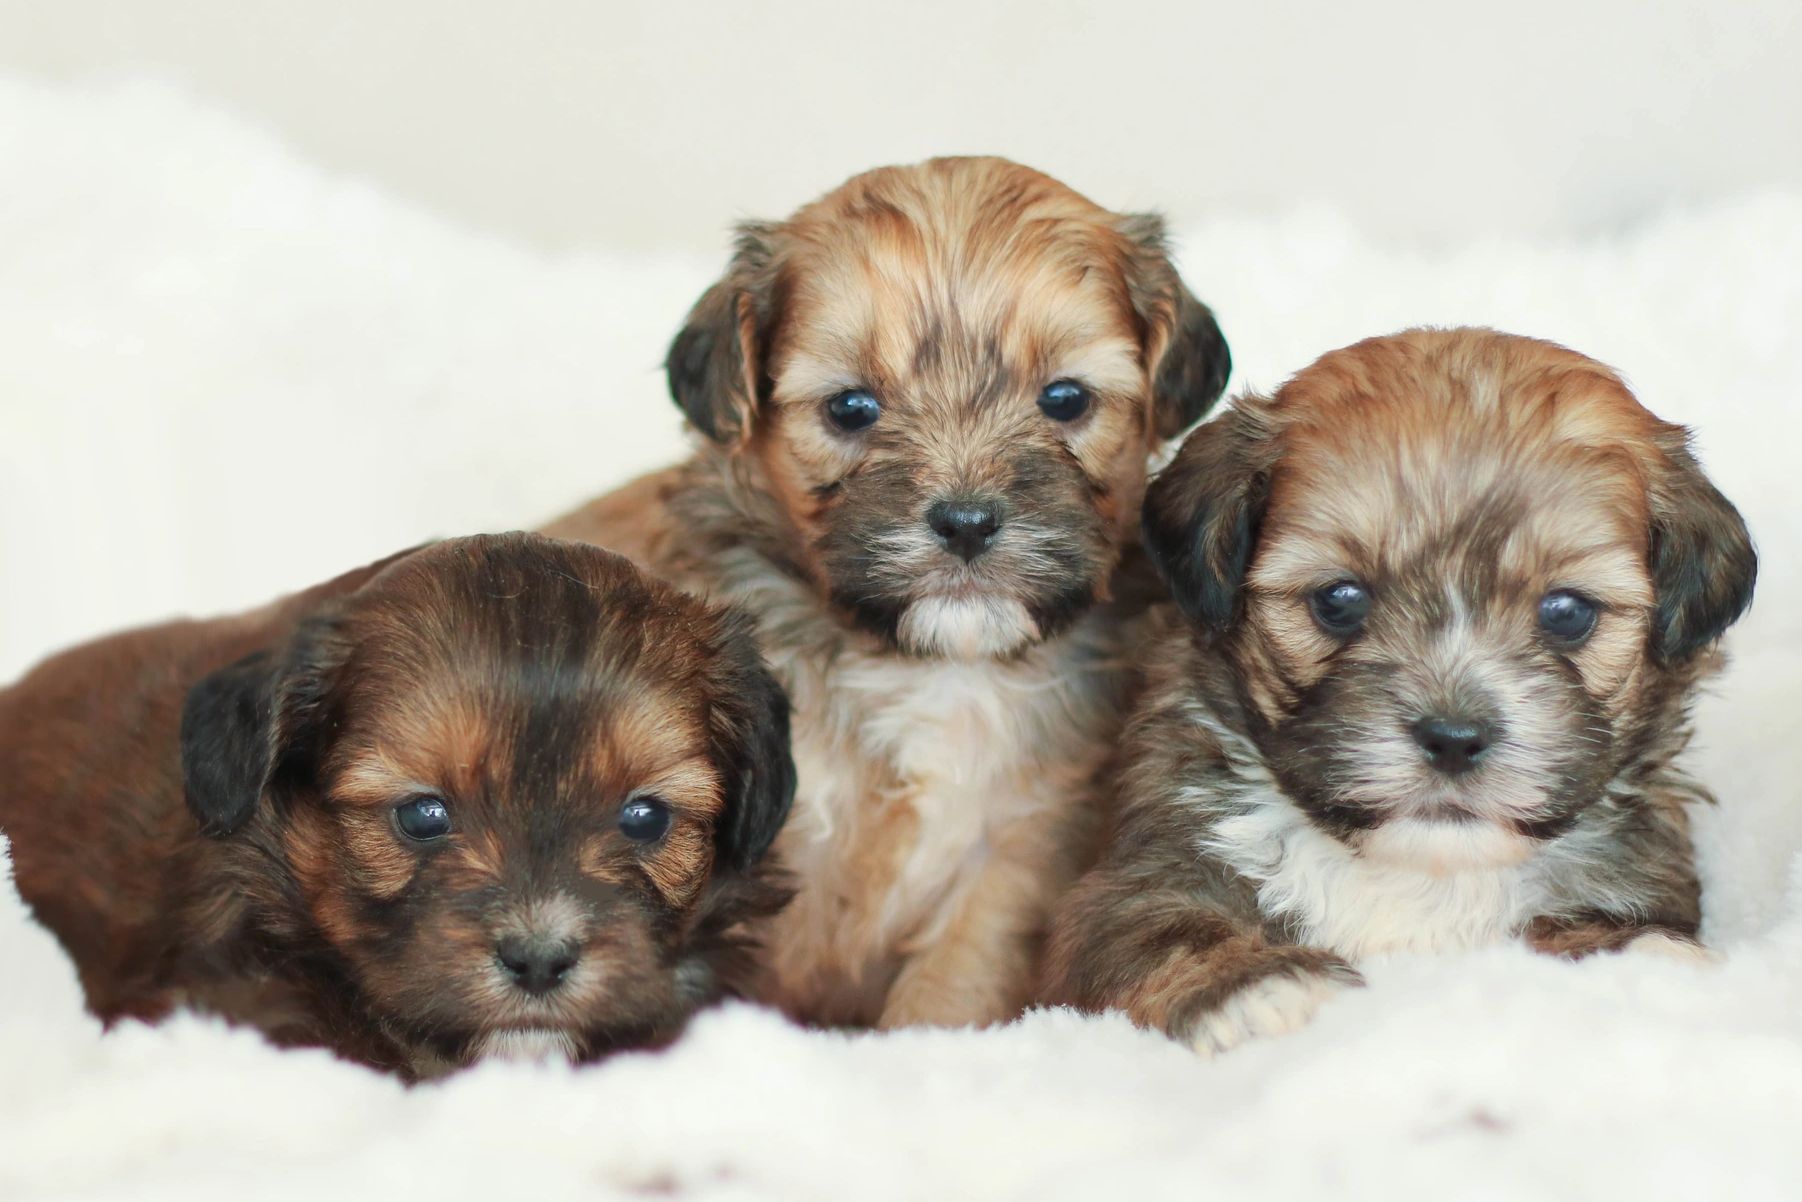 Shihpoo puppies, Shihpoo puppies for sale, shihpoo breeder, shih poo breeders, shih poo puppies